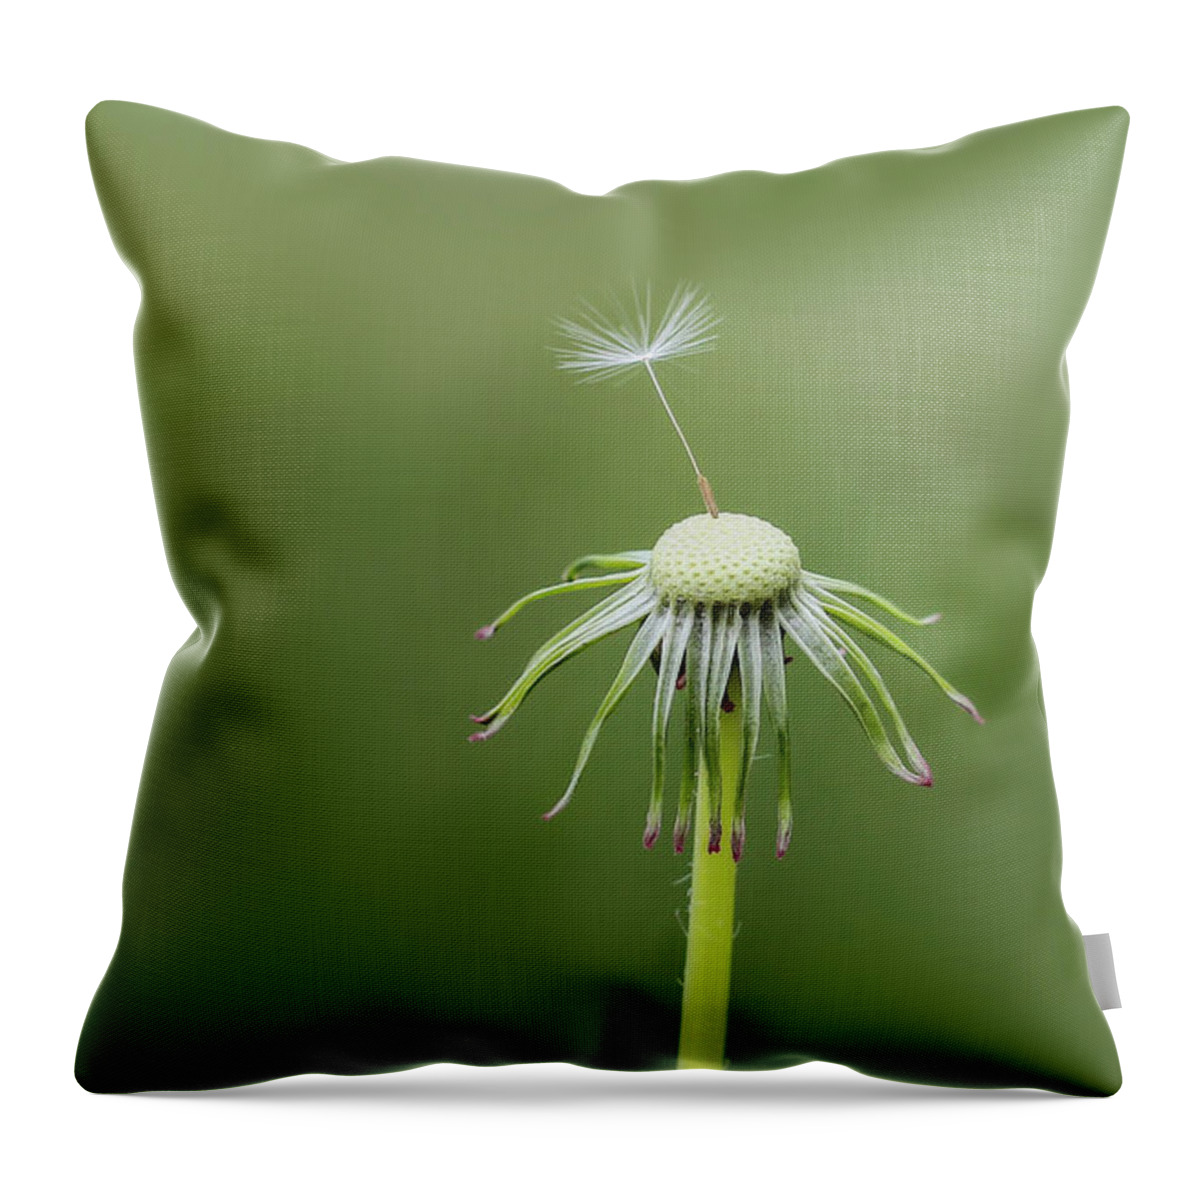 Abstract Throw Pillow featuring the photograph One dandy by Bess Hamiti